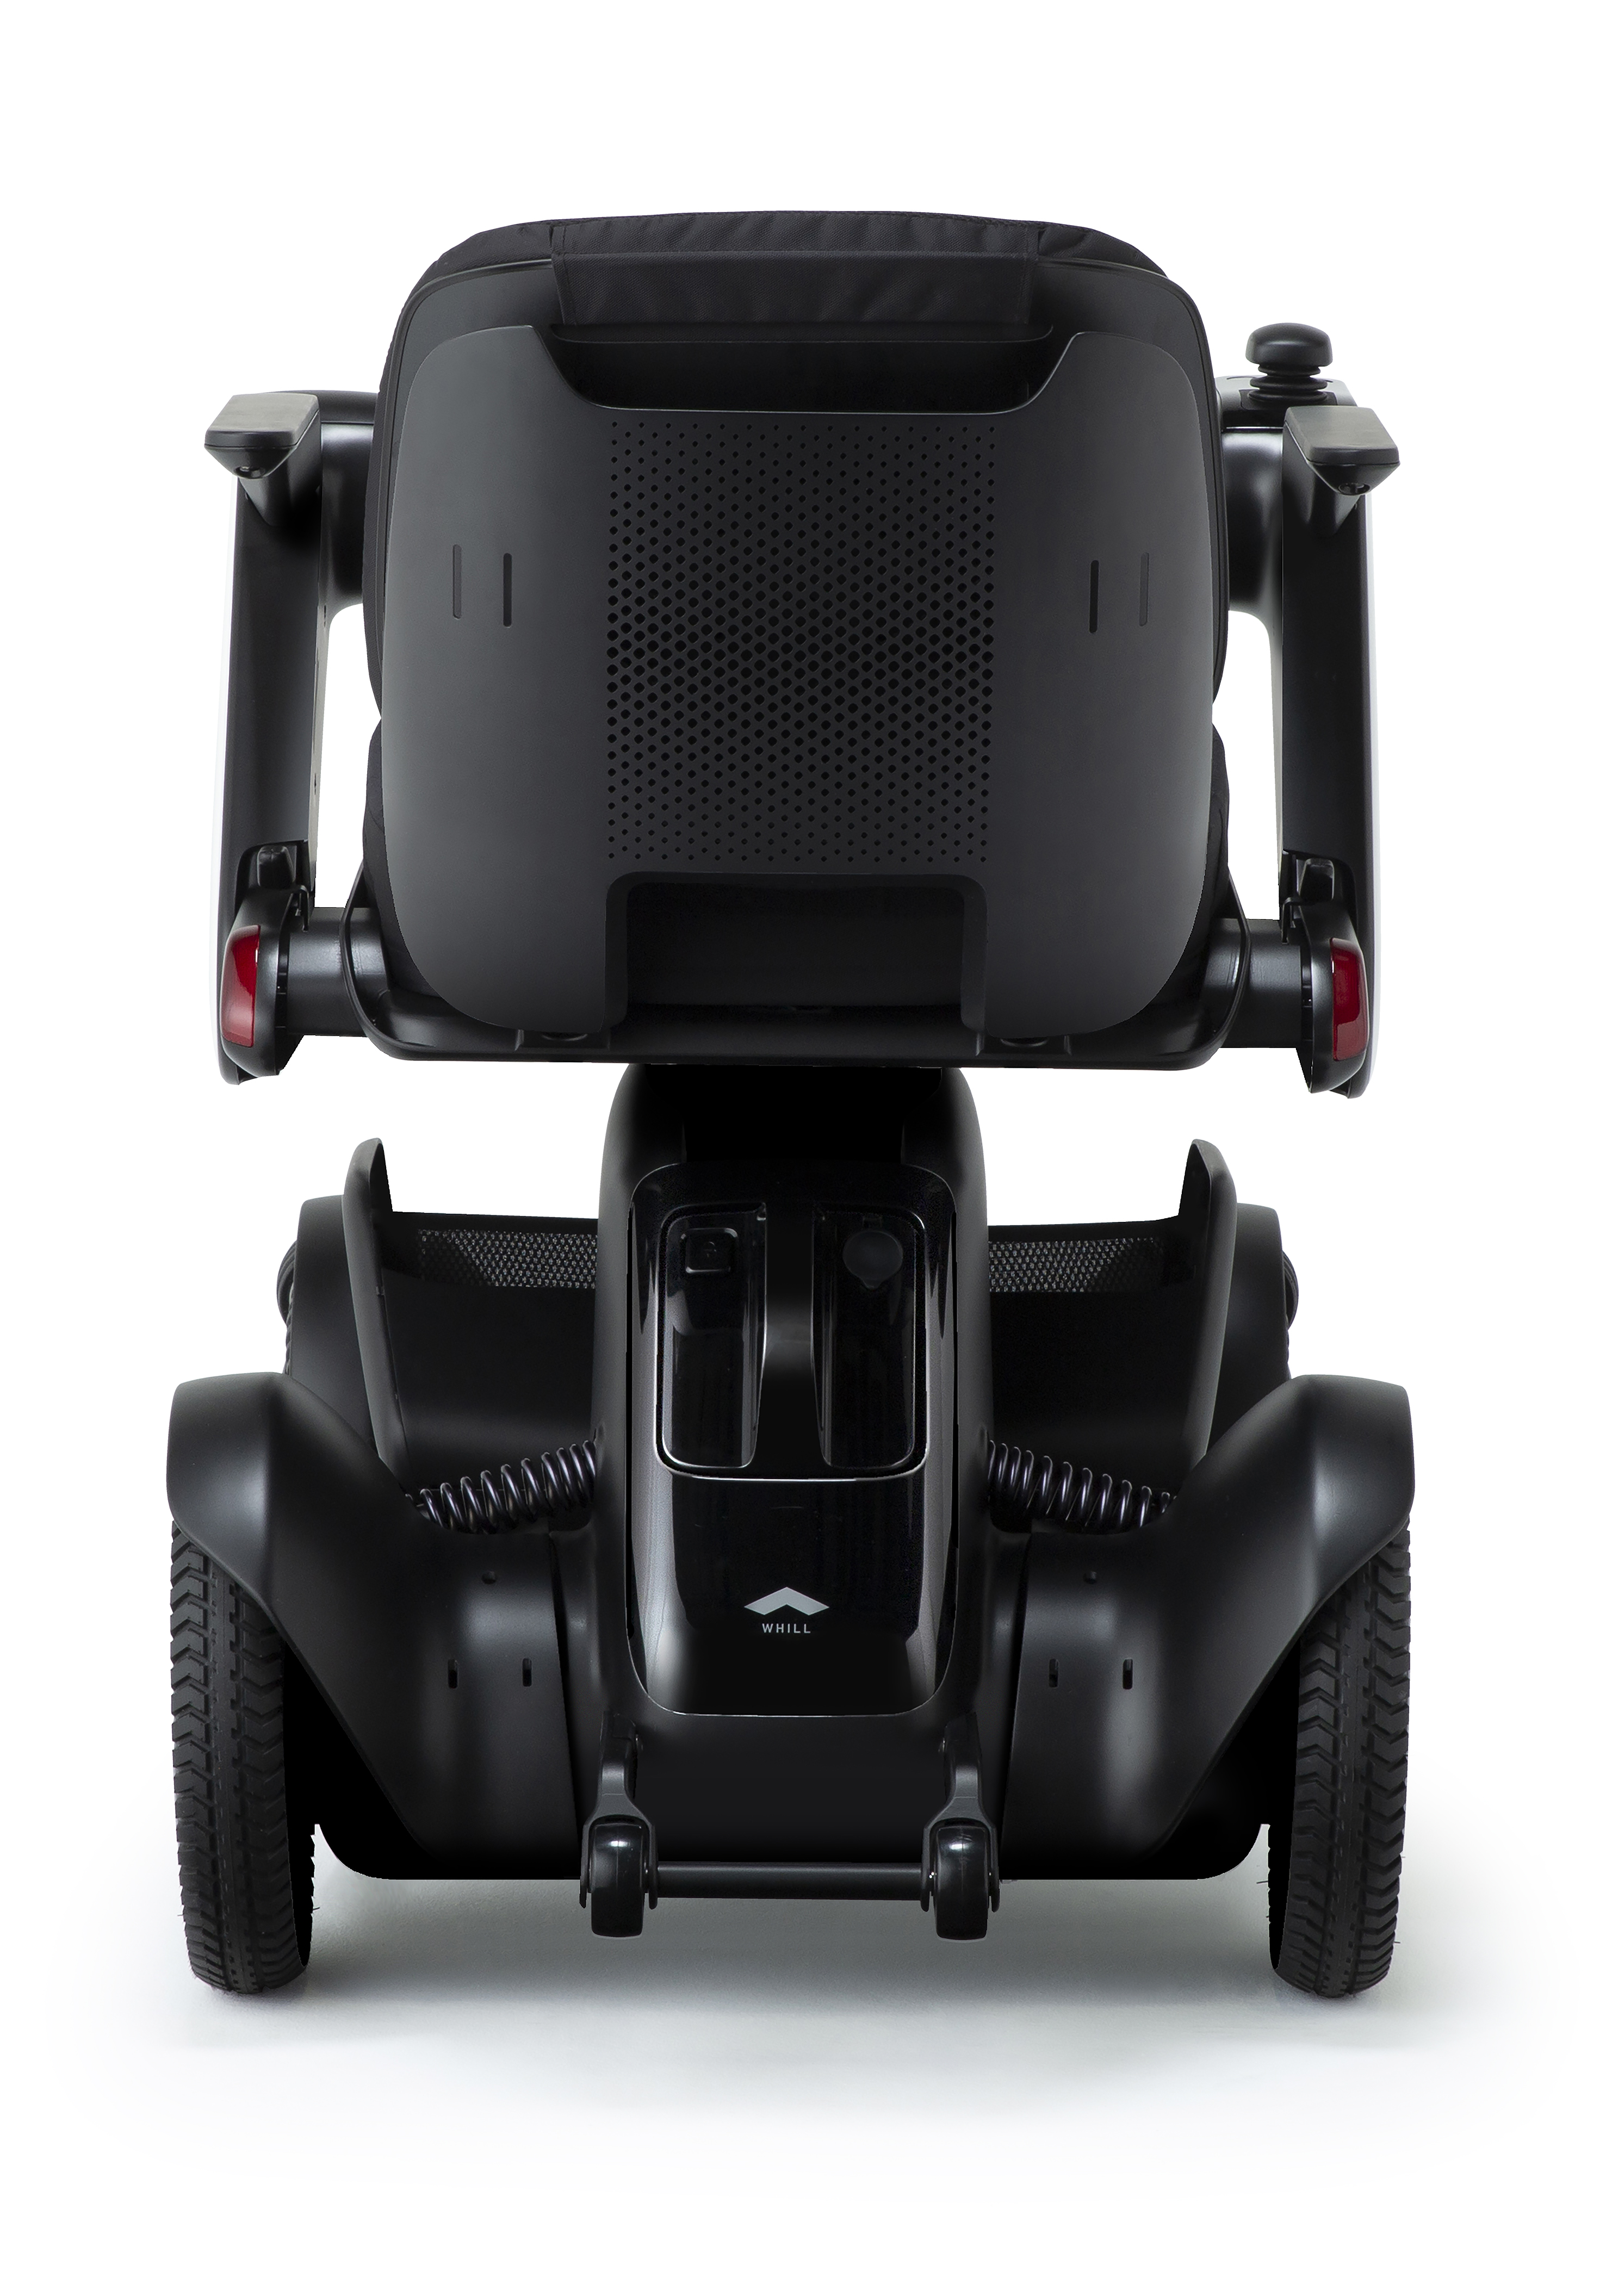 Rear view of whill c2 portable power chair